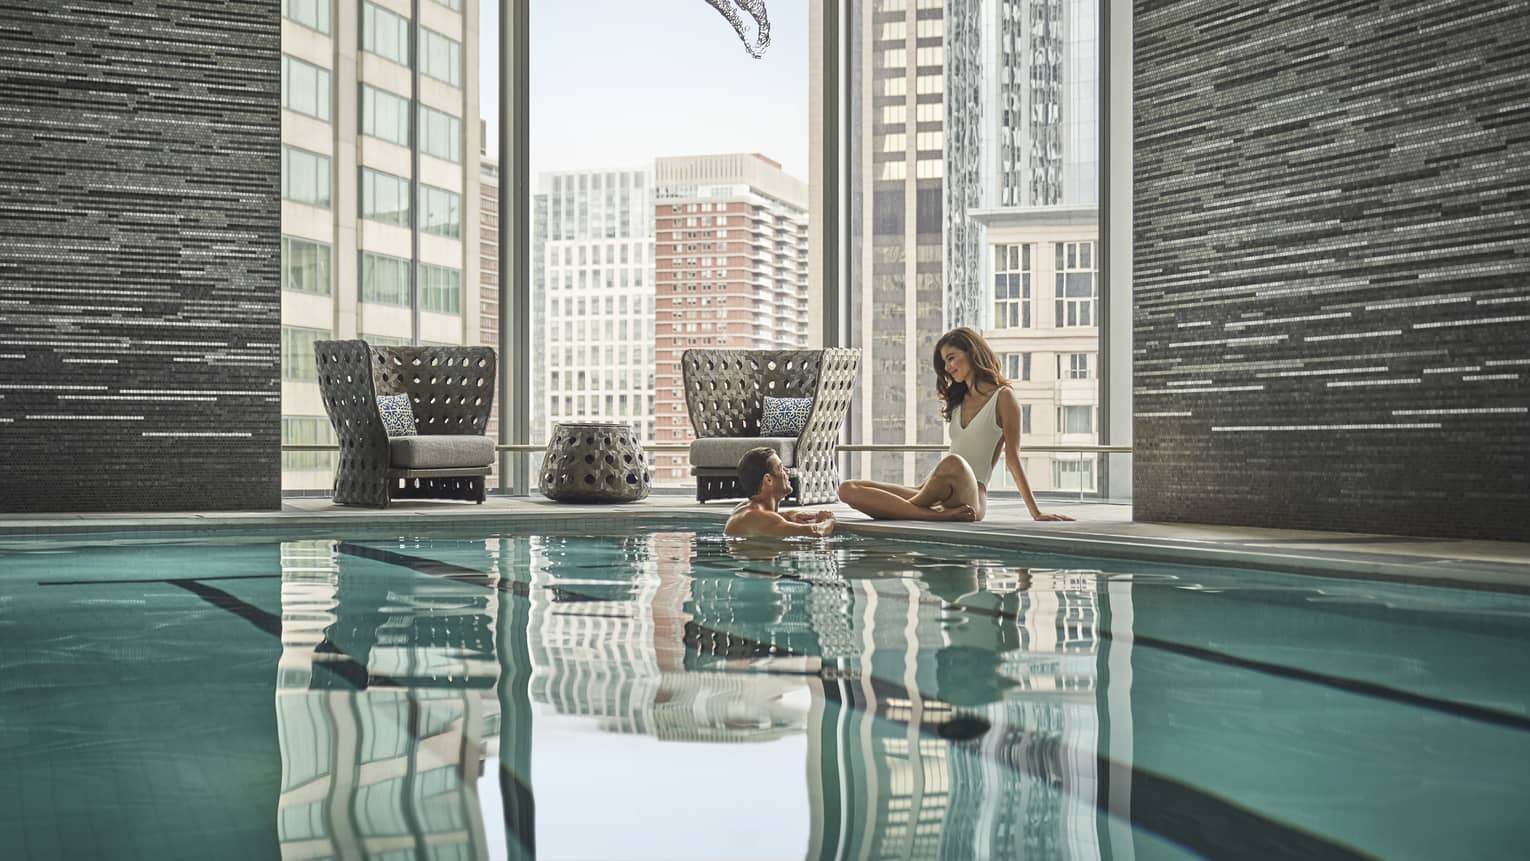 A couple embraces in a lap pool; behind them, floor-to-ceiling windows reveal an urban landscape.